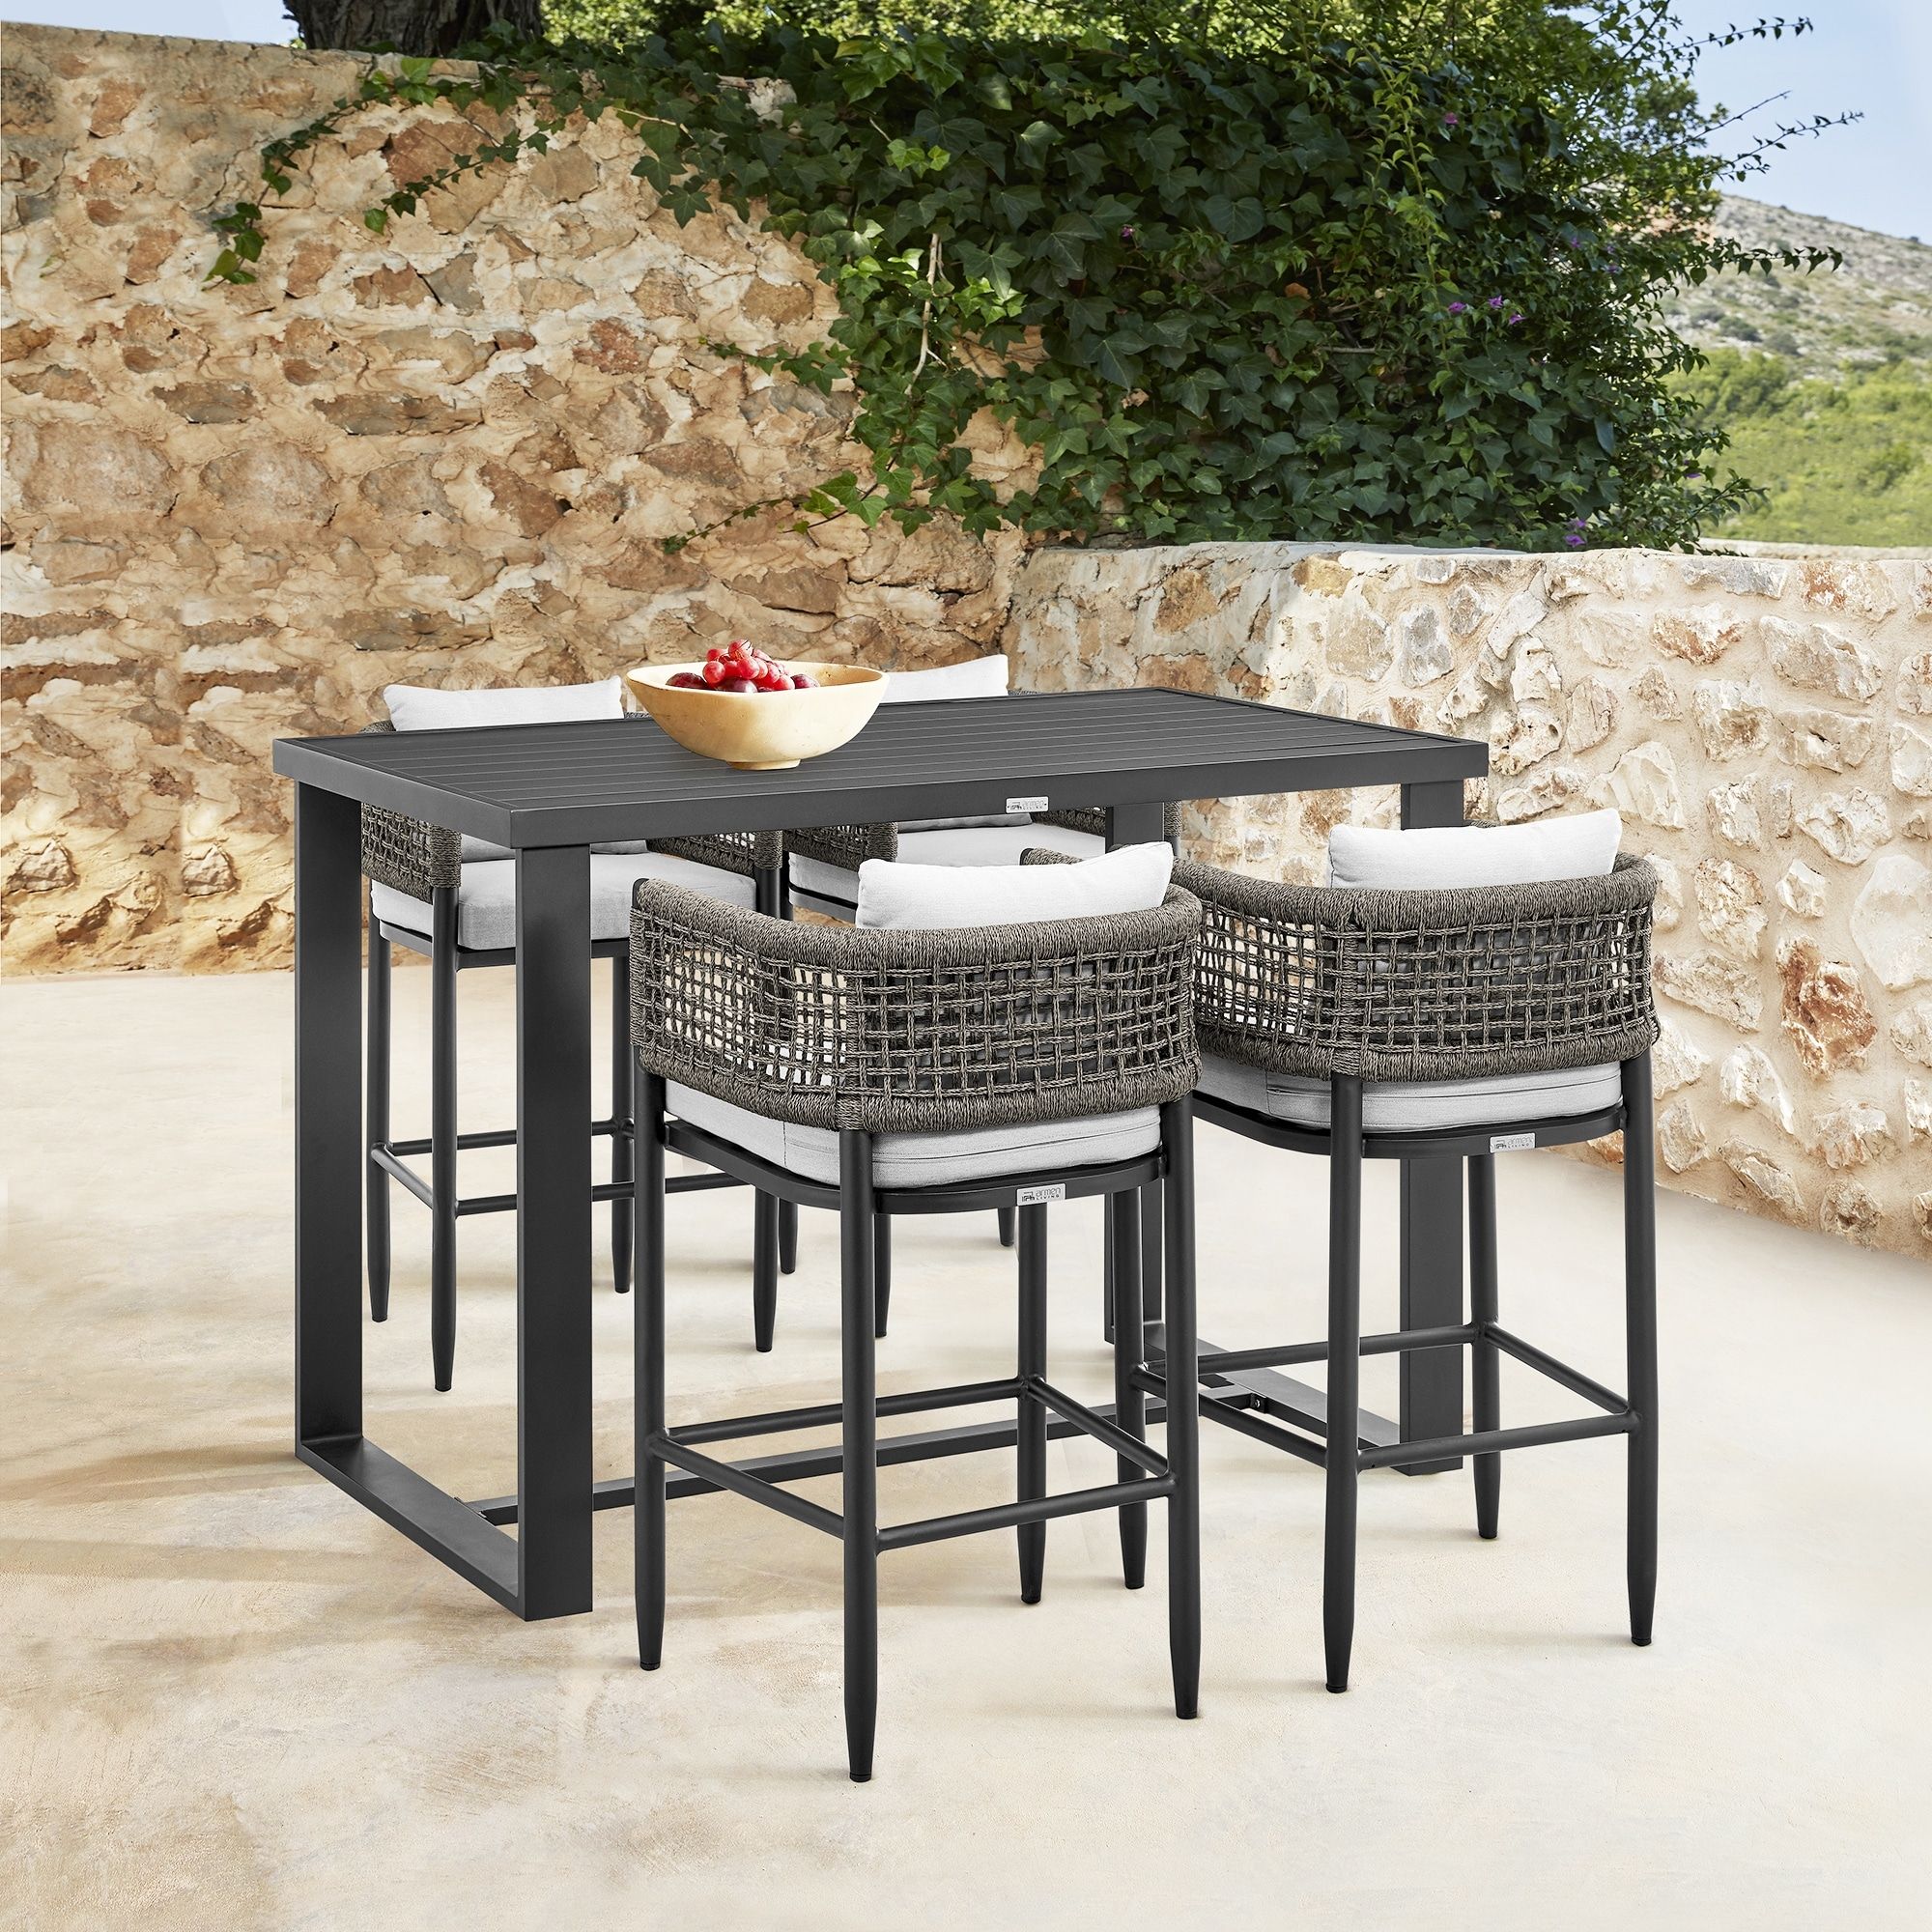 A Complete Guide to Selecting the Perfect Patio Bar Set